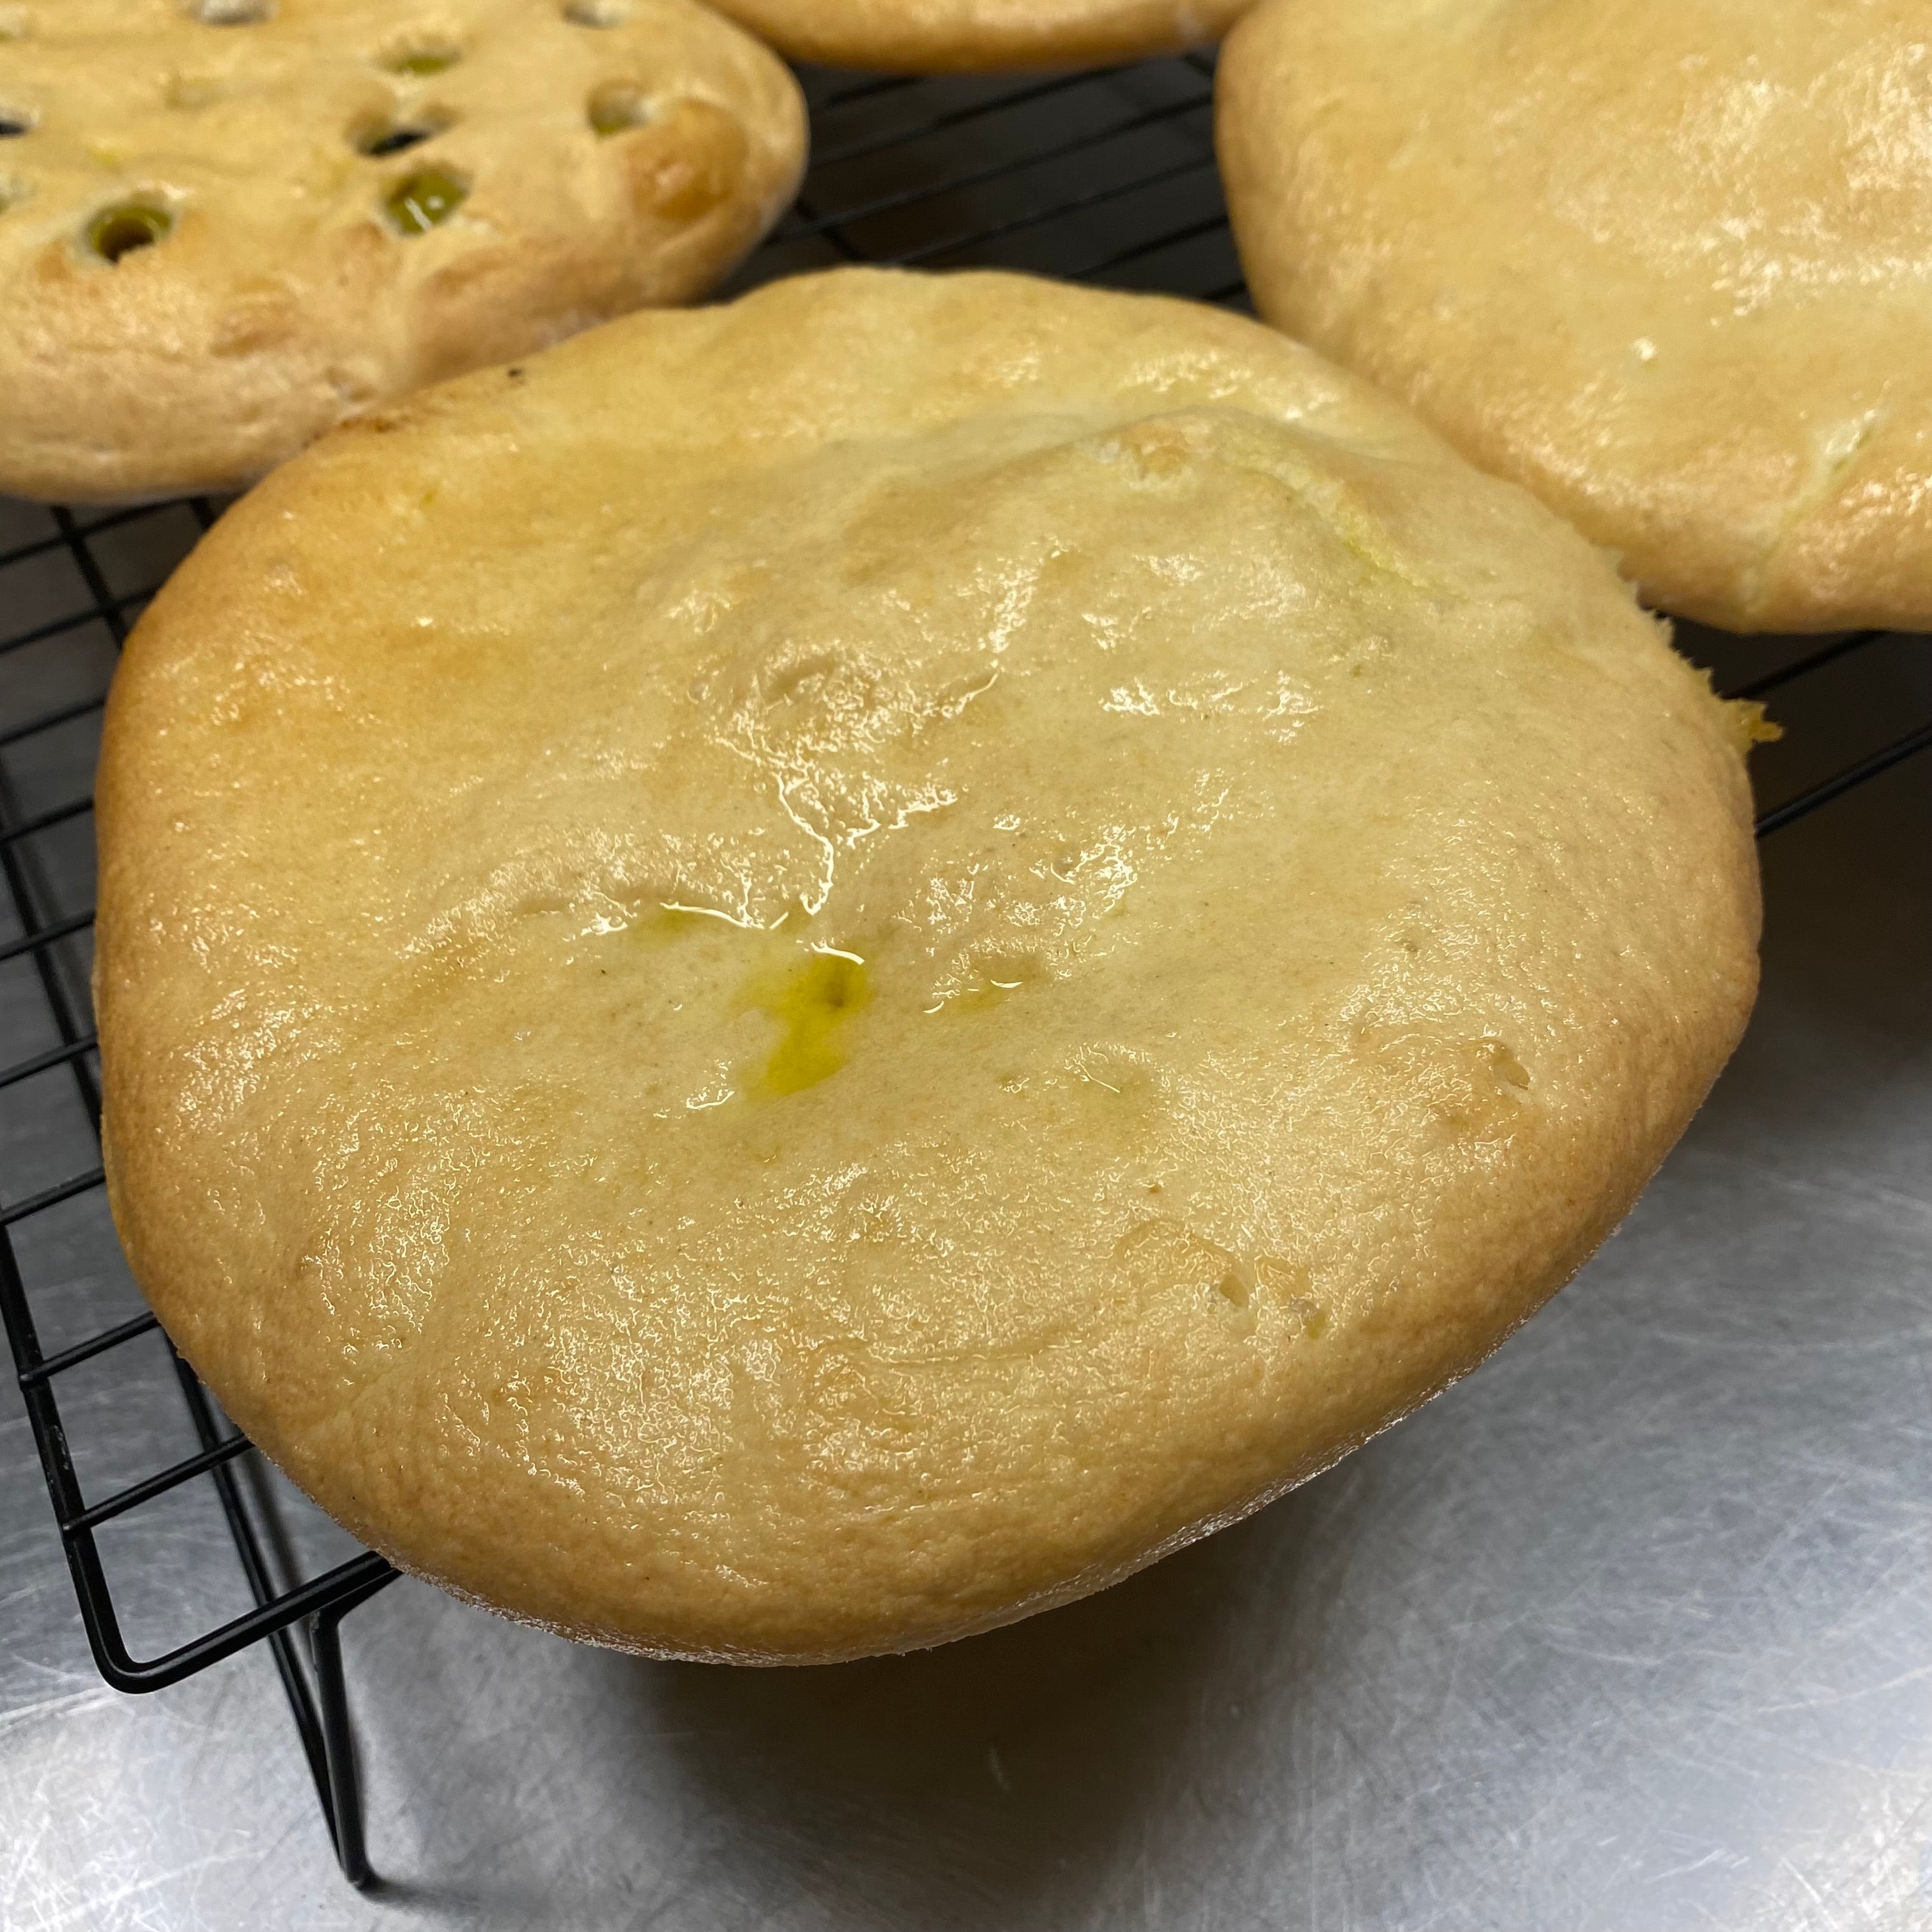 Focaccia bread with extra virgin olive oil